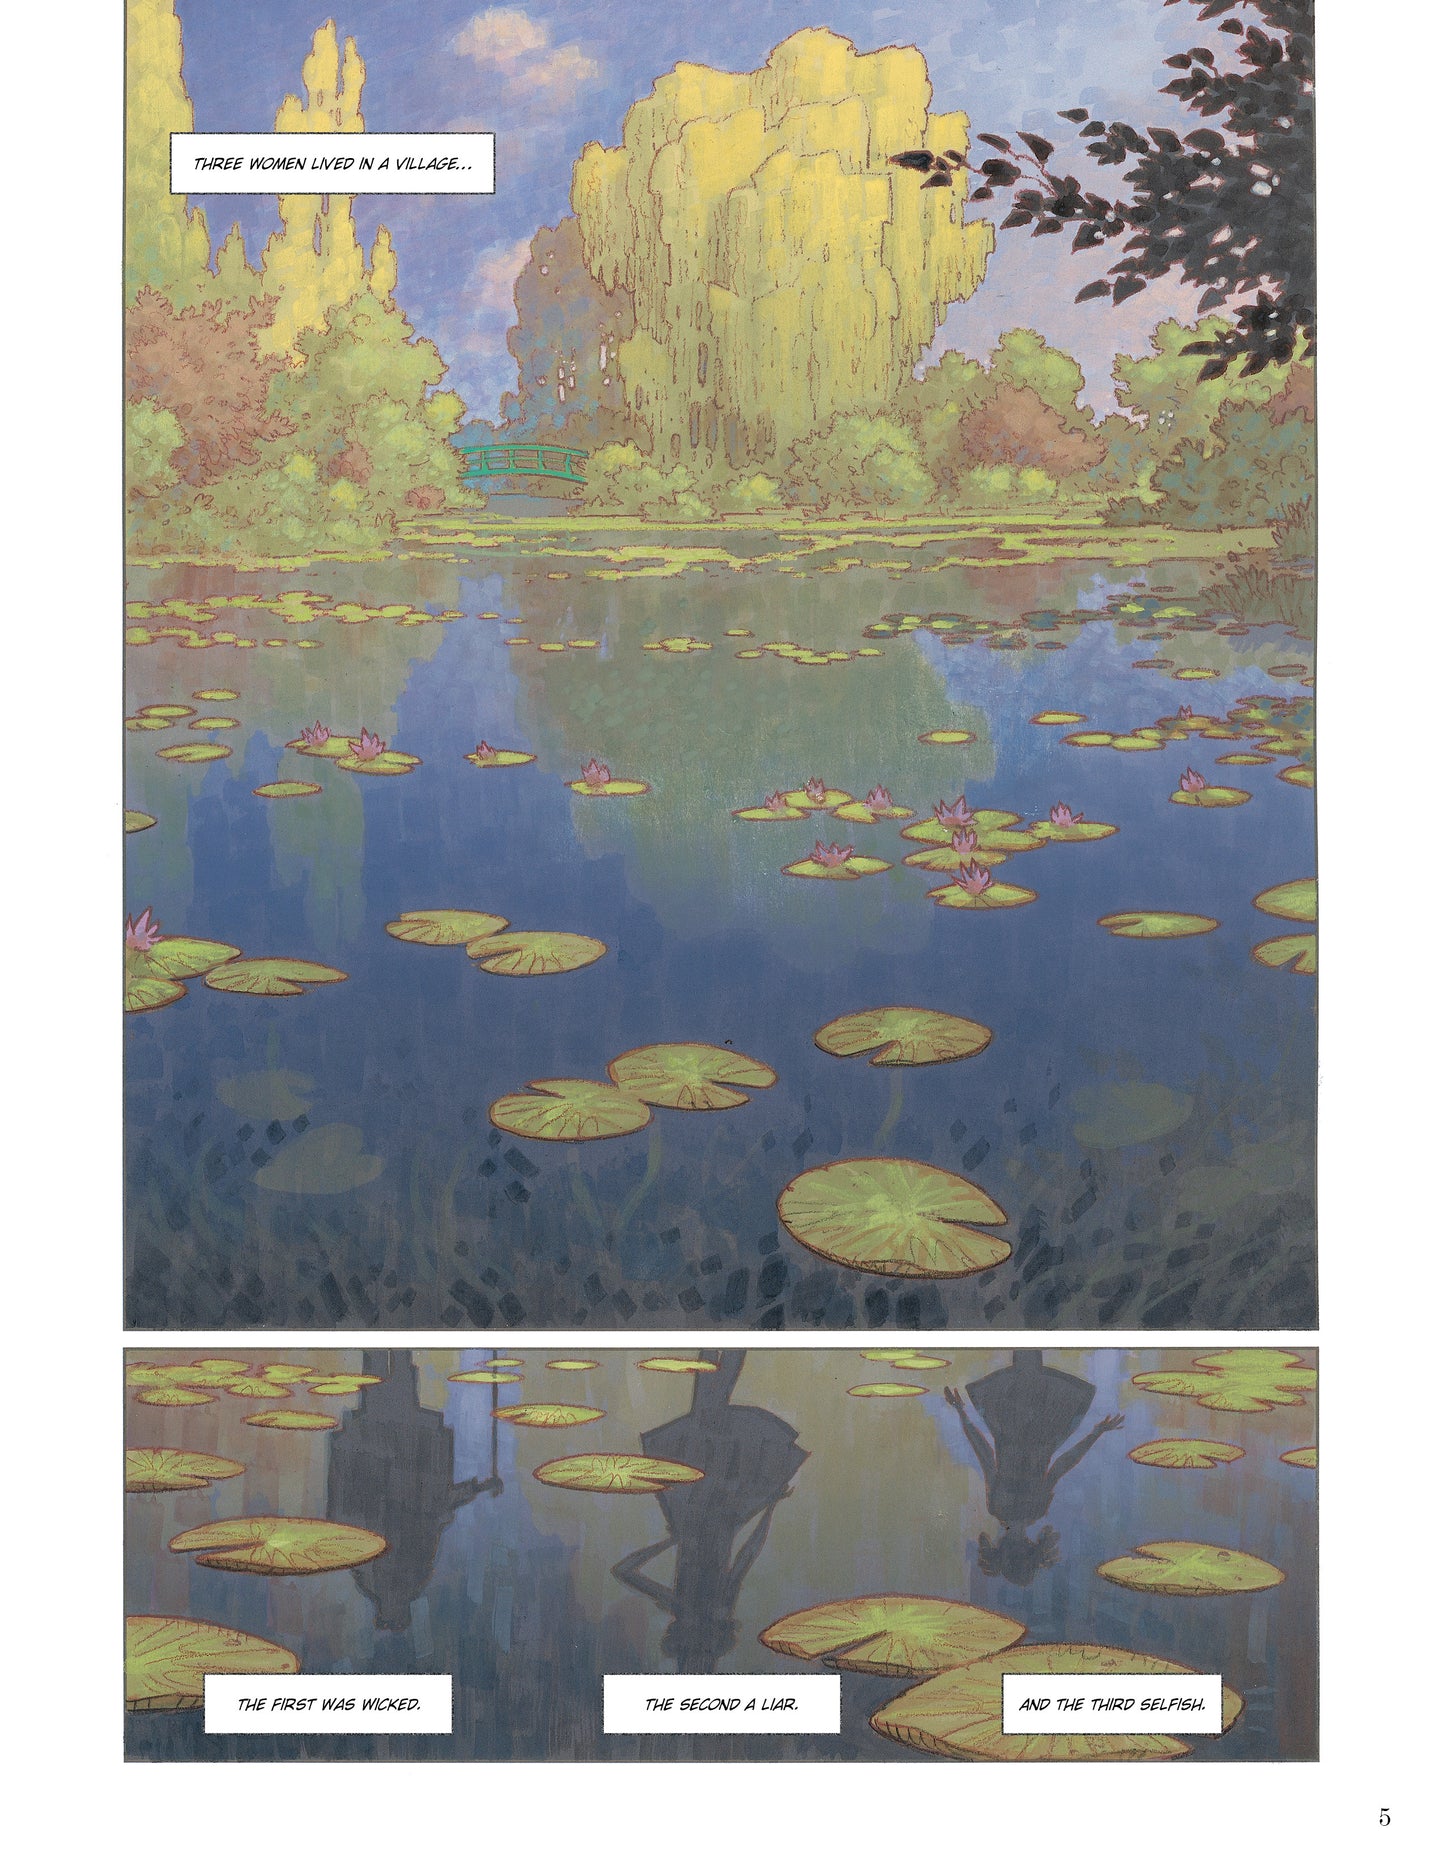 BLACK WATER LILIES, by Frederic Duval, Michael Bussi, and Didier Cassegrain